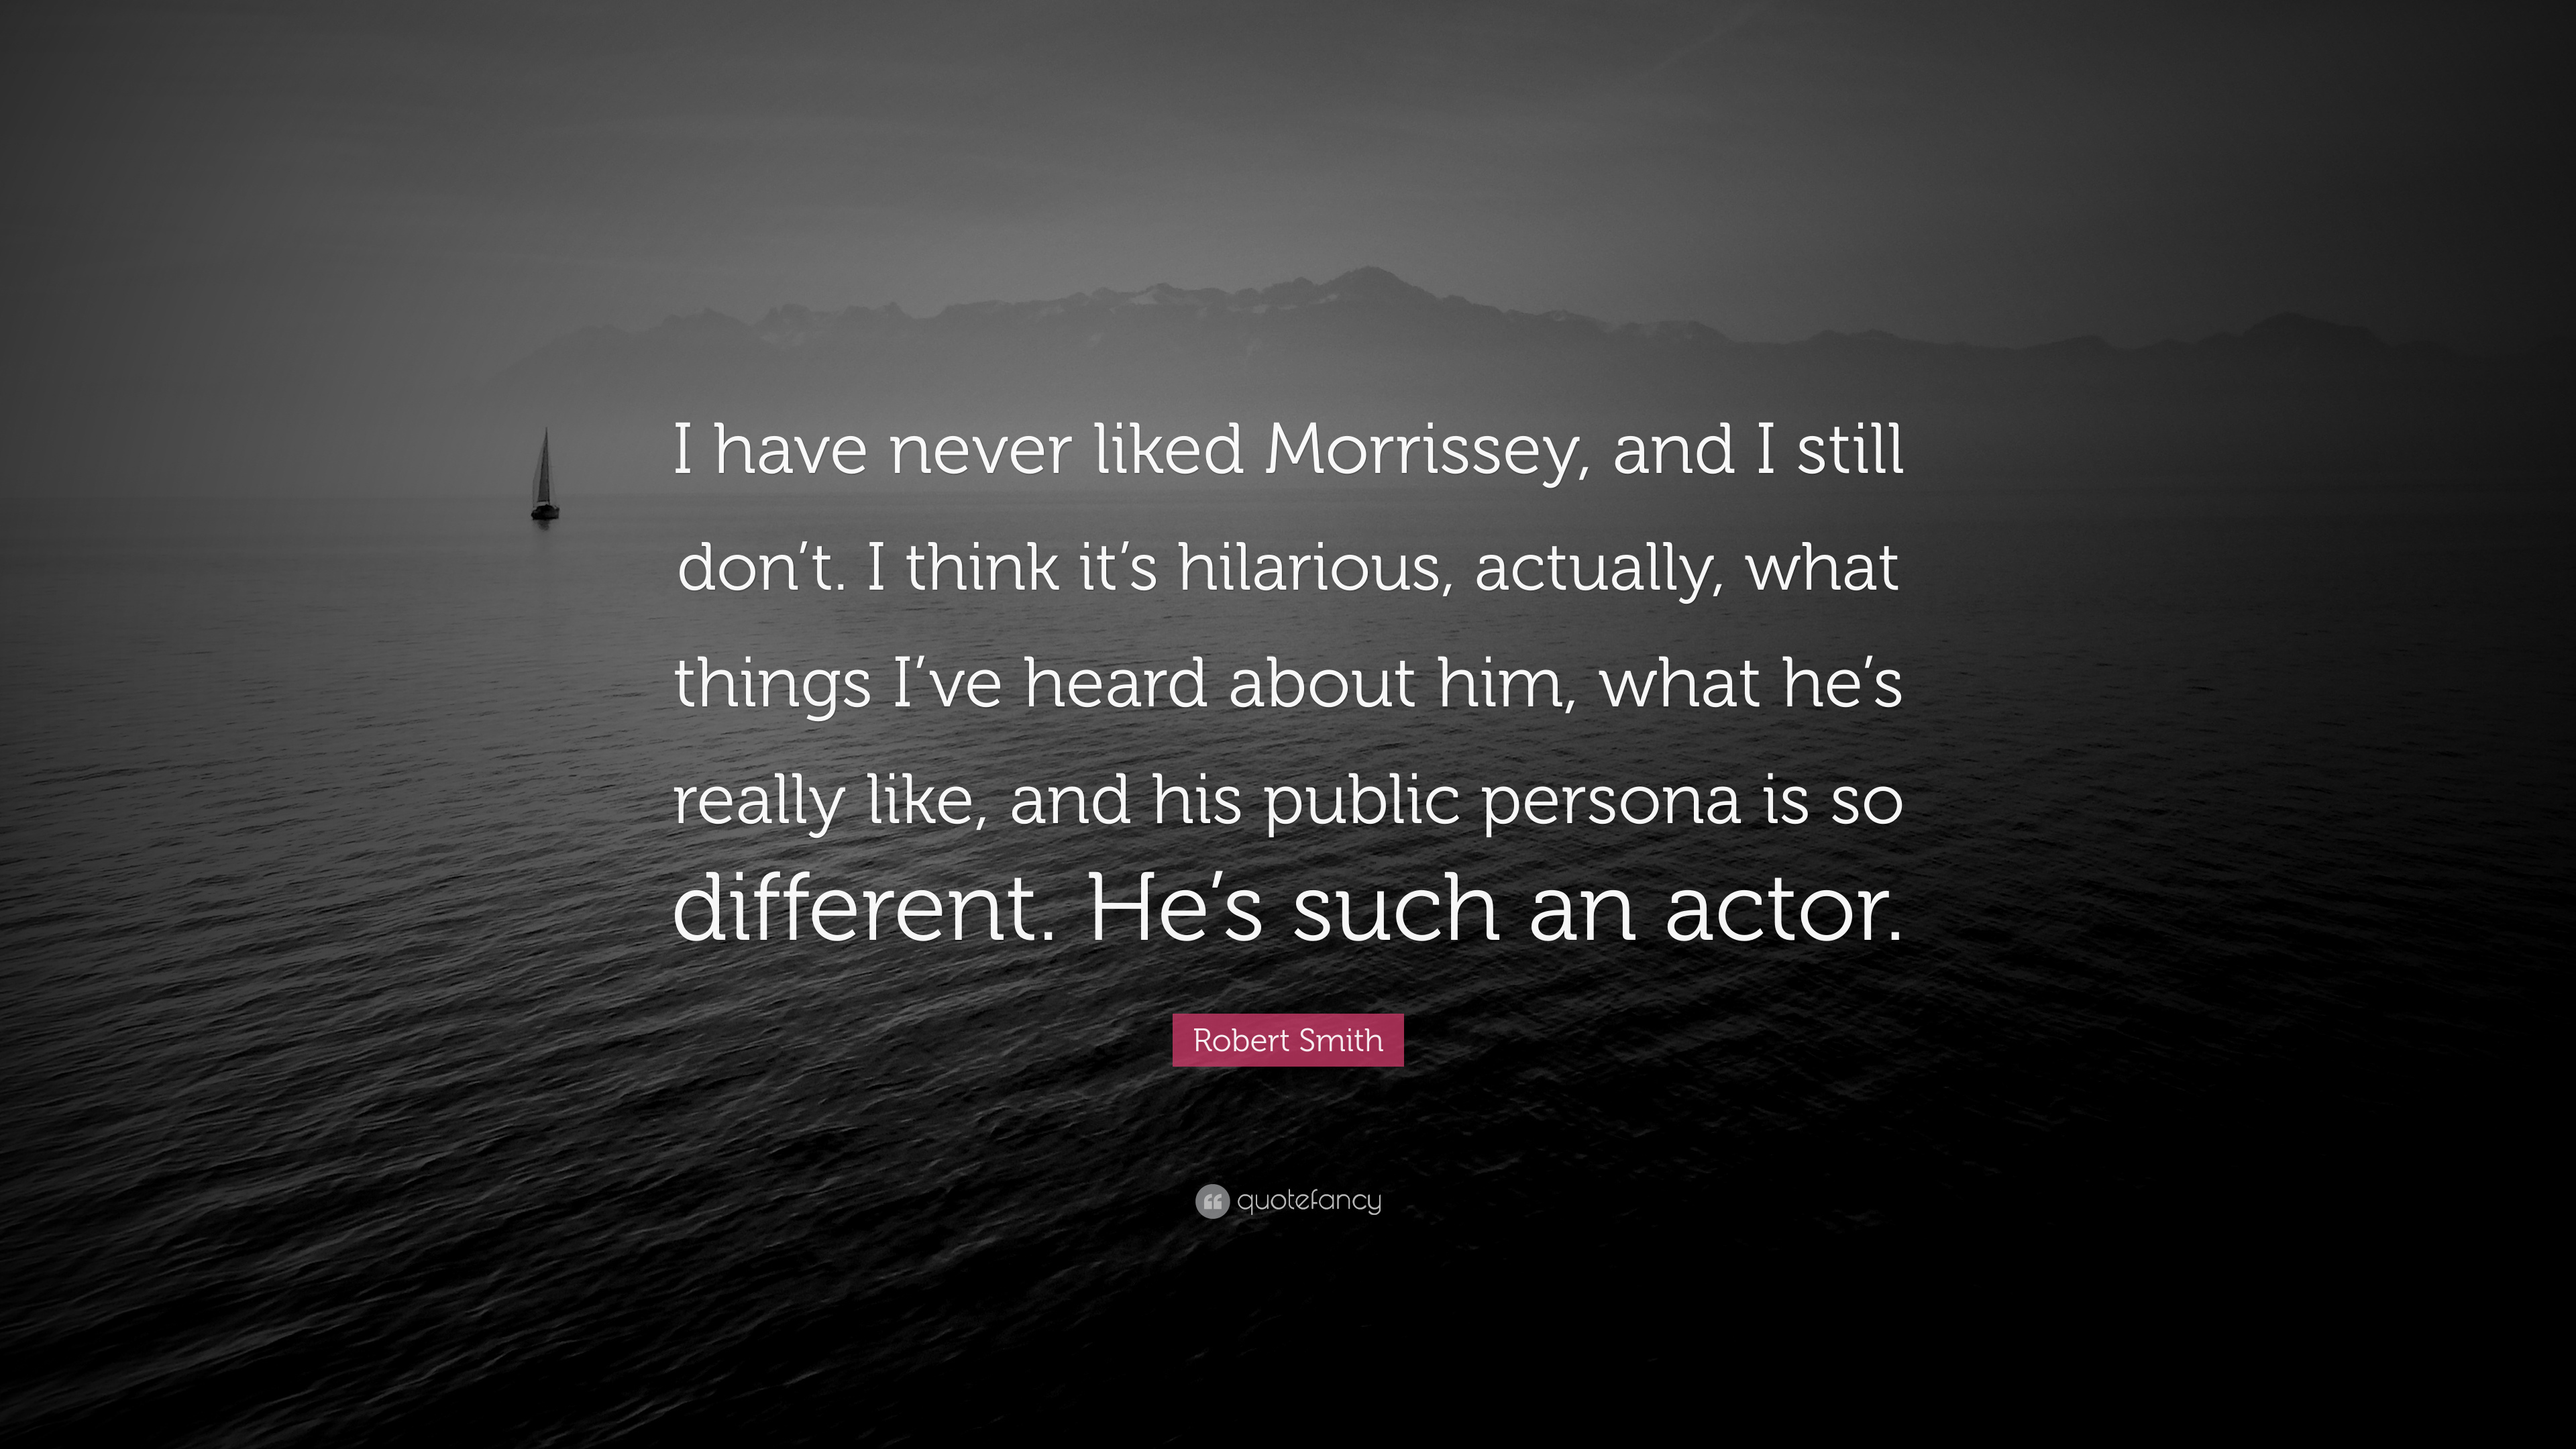 7 Quotes About Morrissey